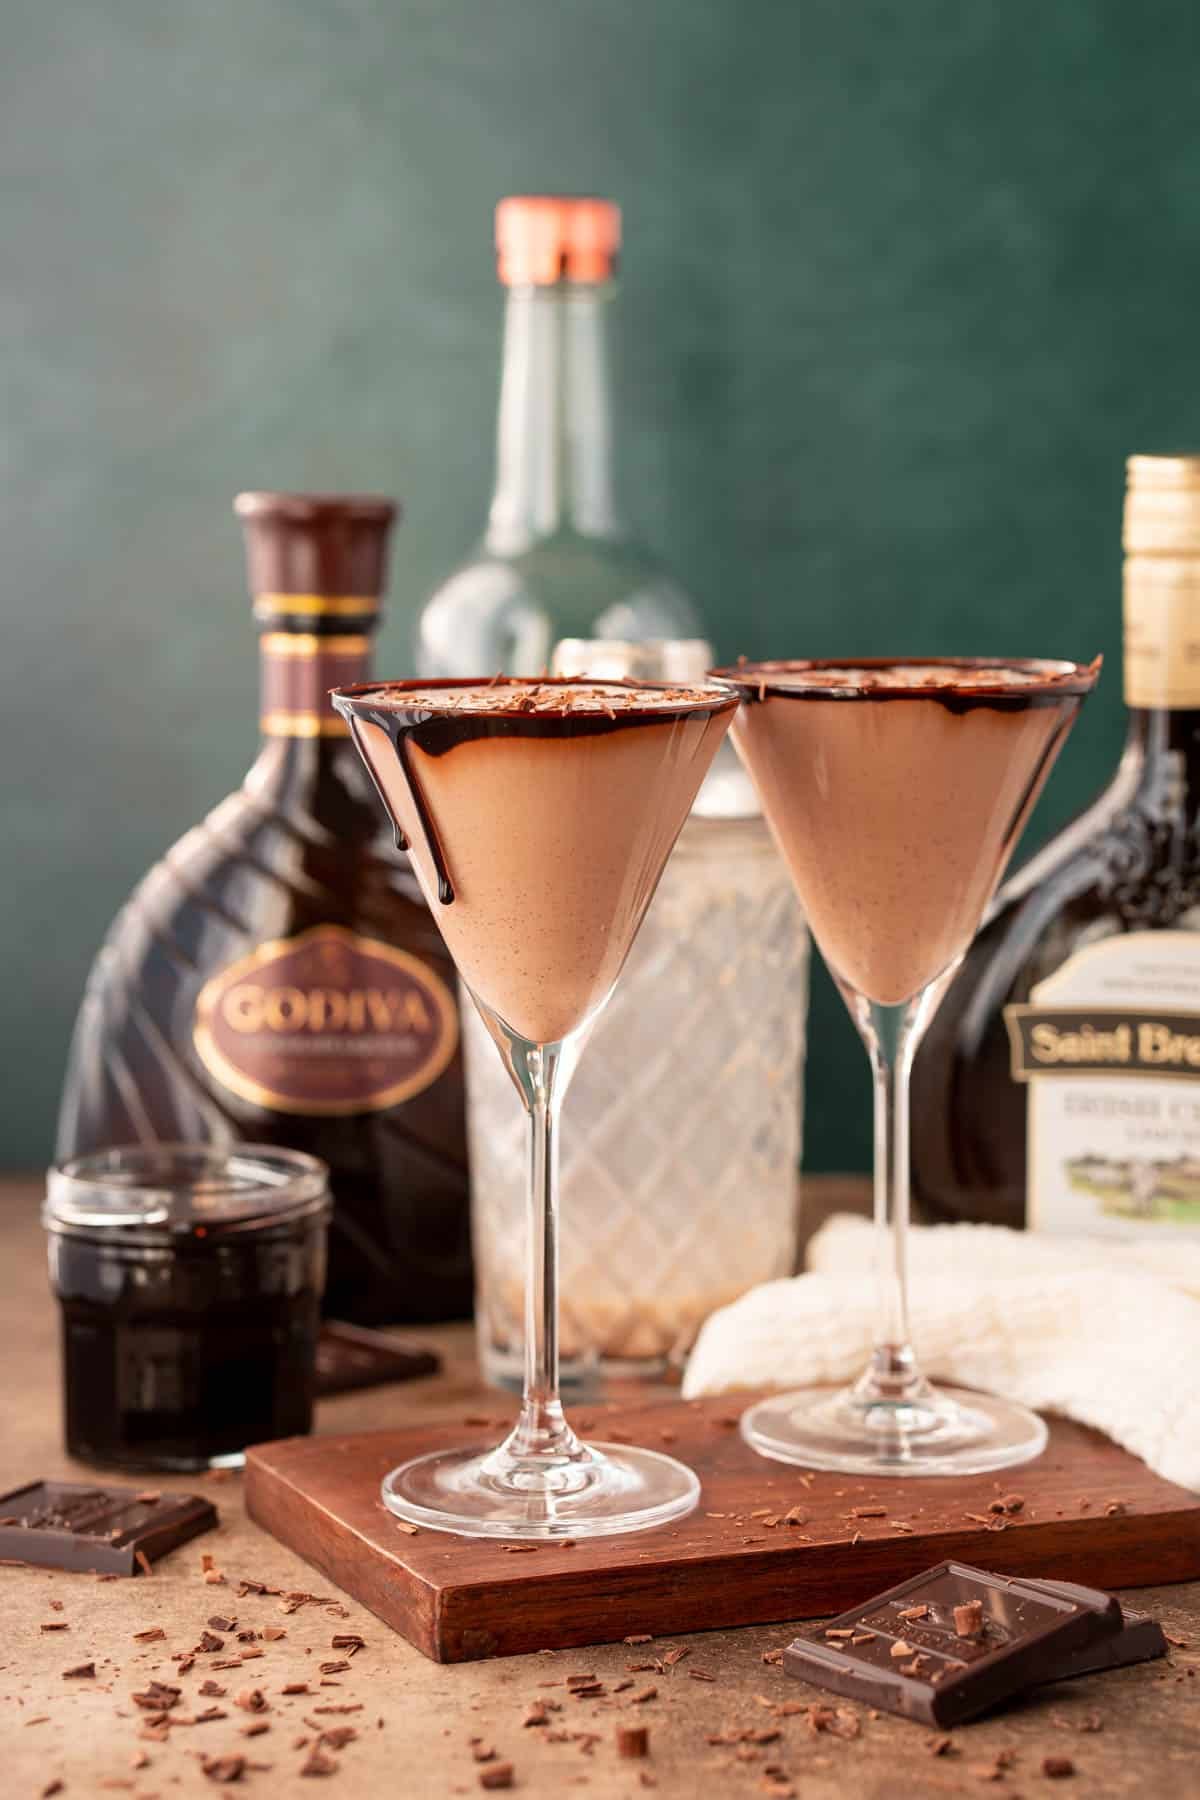 Two martini glasses filled with chocolate martinis on a wooden cutting board.